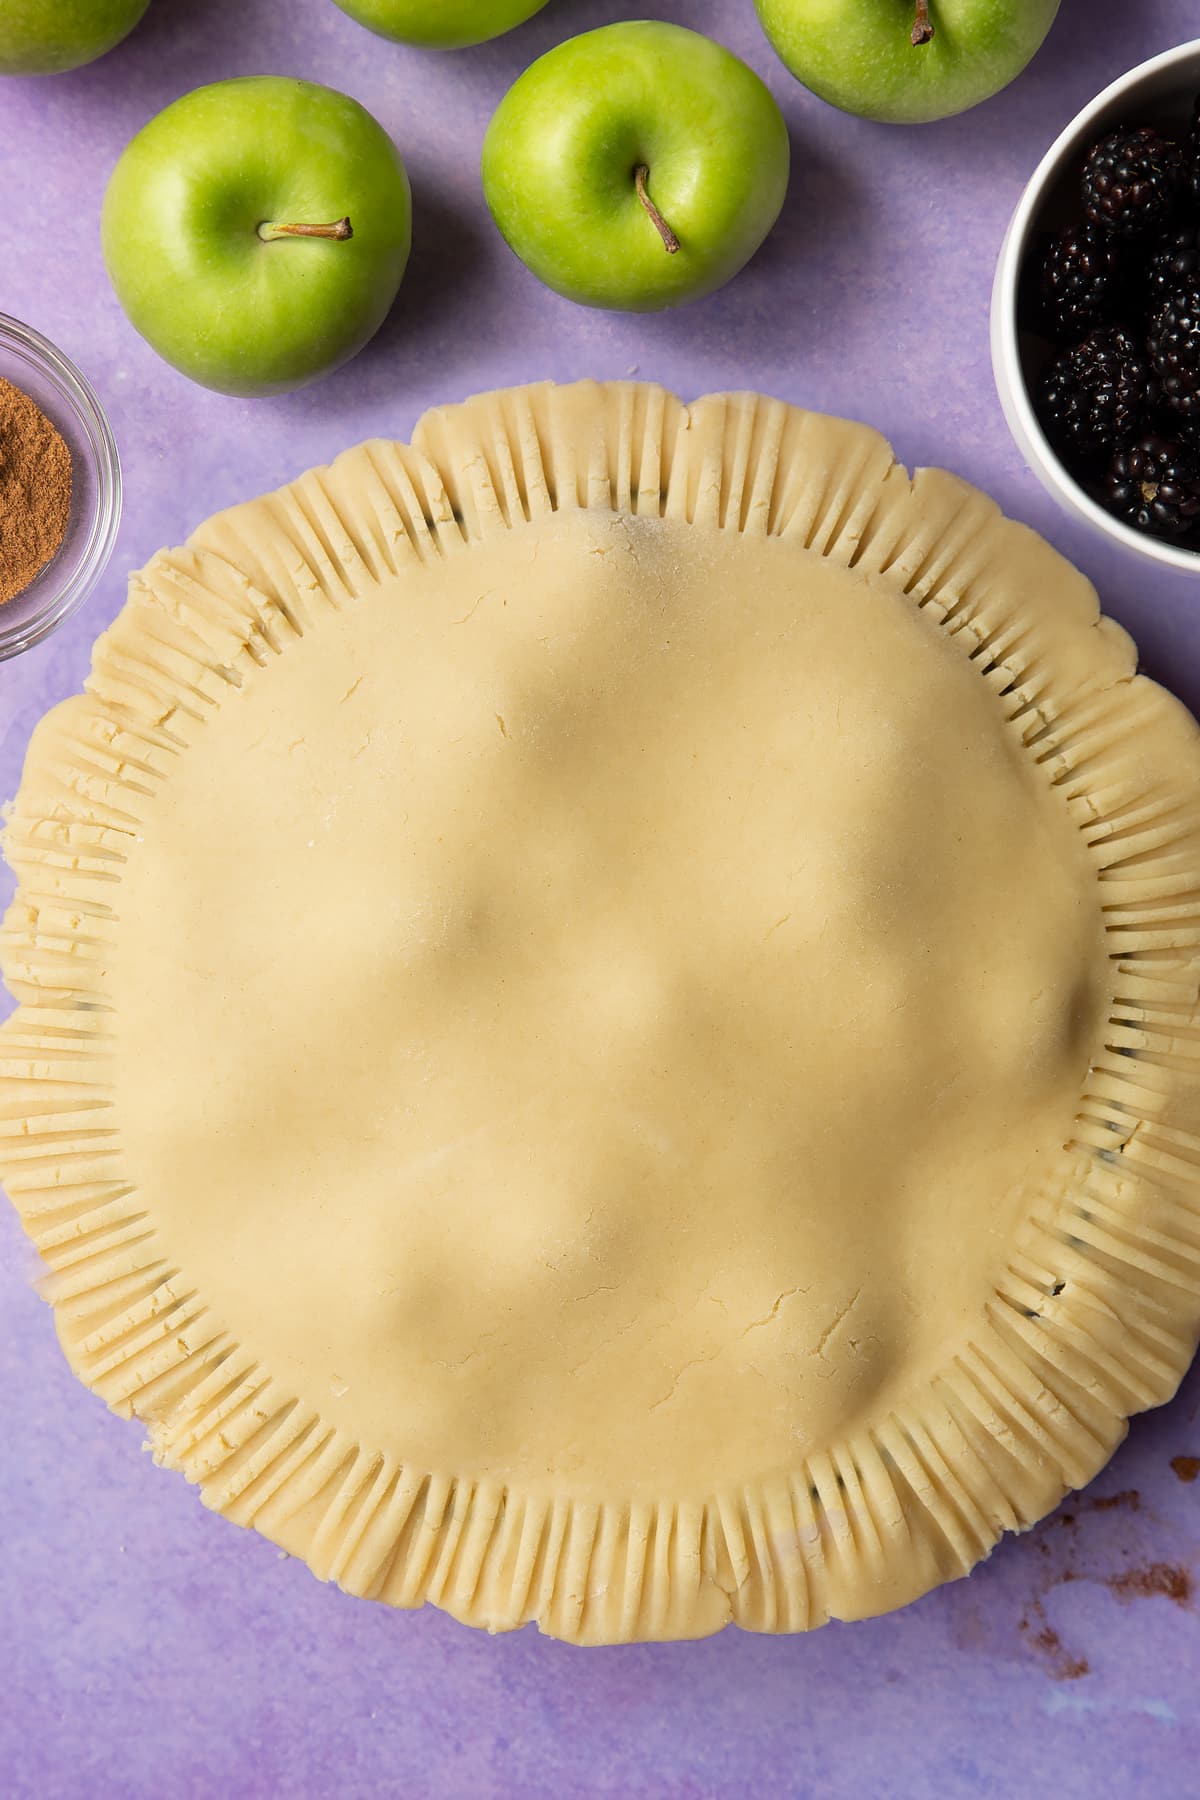 A pastry pie filled with apple slices and blackberries, a fork has been pressed around the edge. Ingredients to make apple and blackberry pie surround the tin.